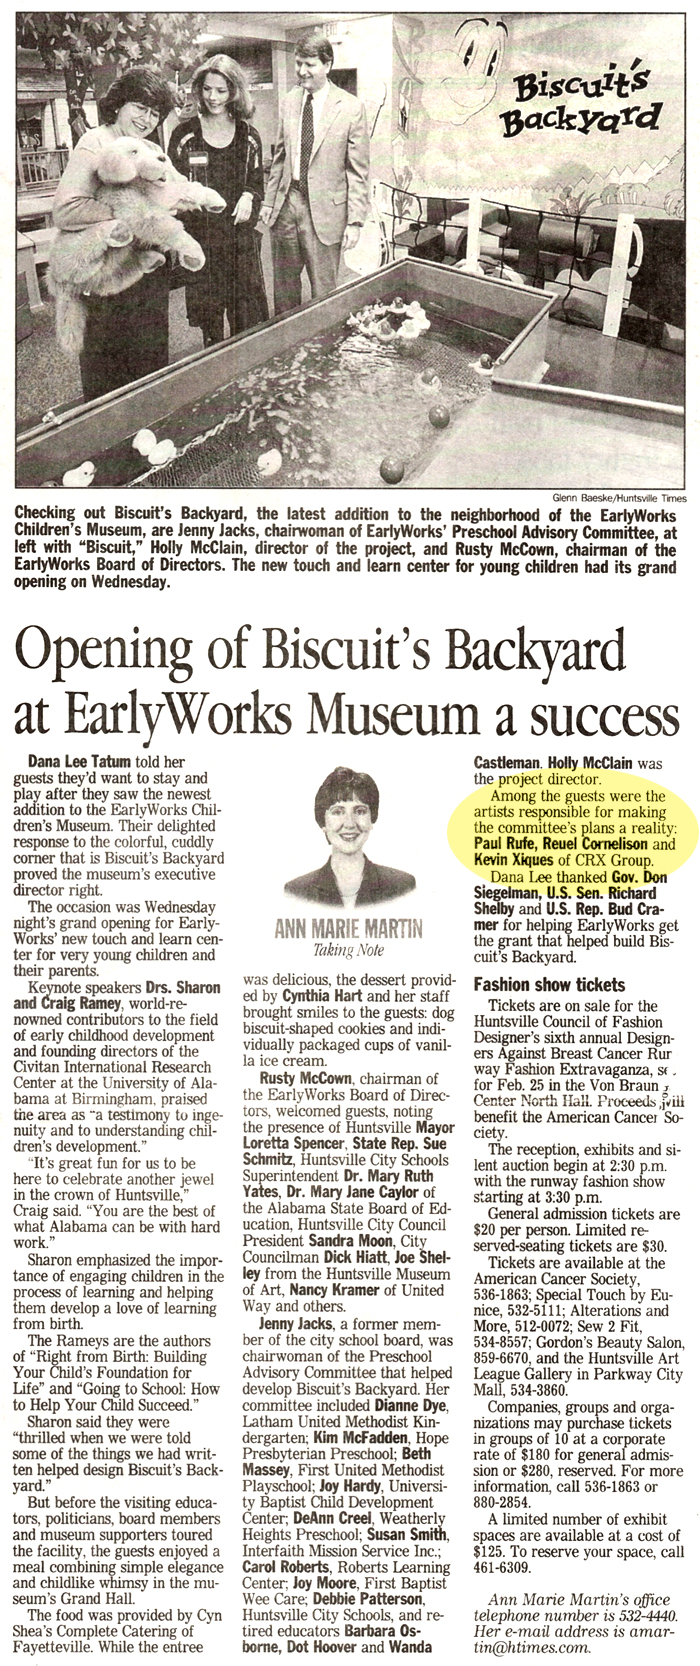 Biscuits Back Yard-Hsv Times Article 2-72